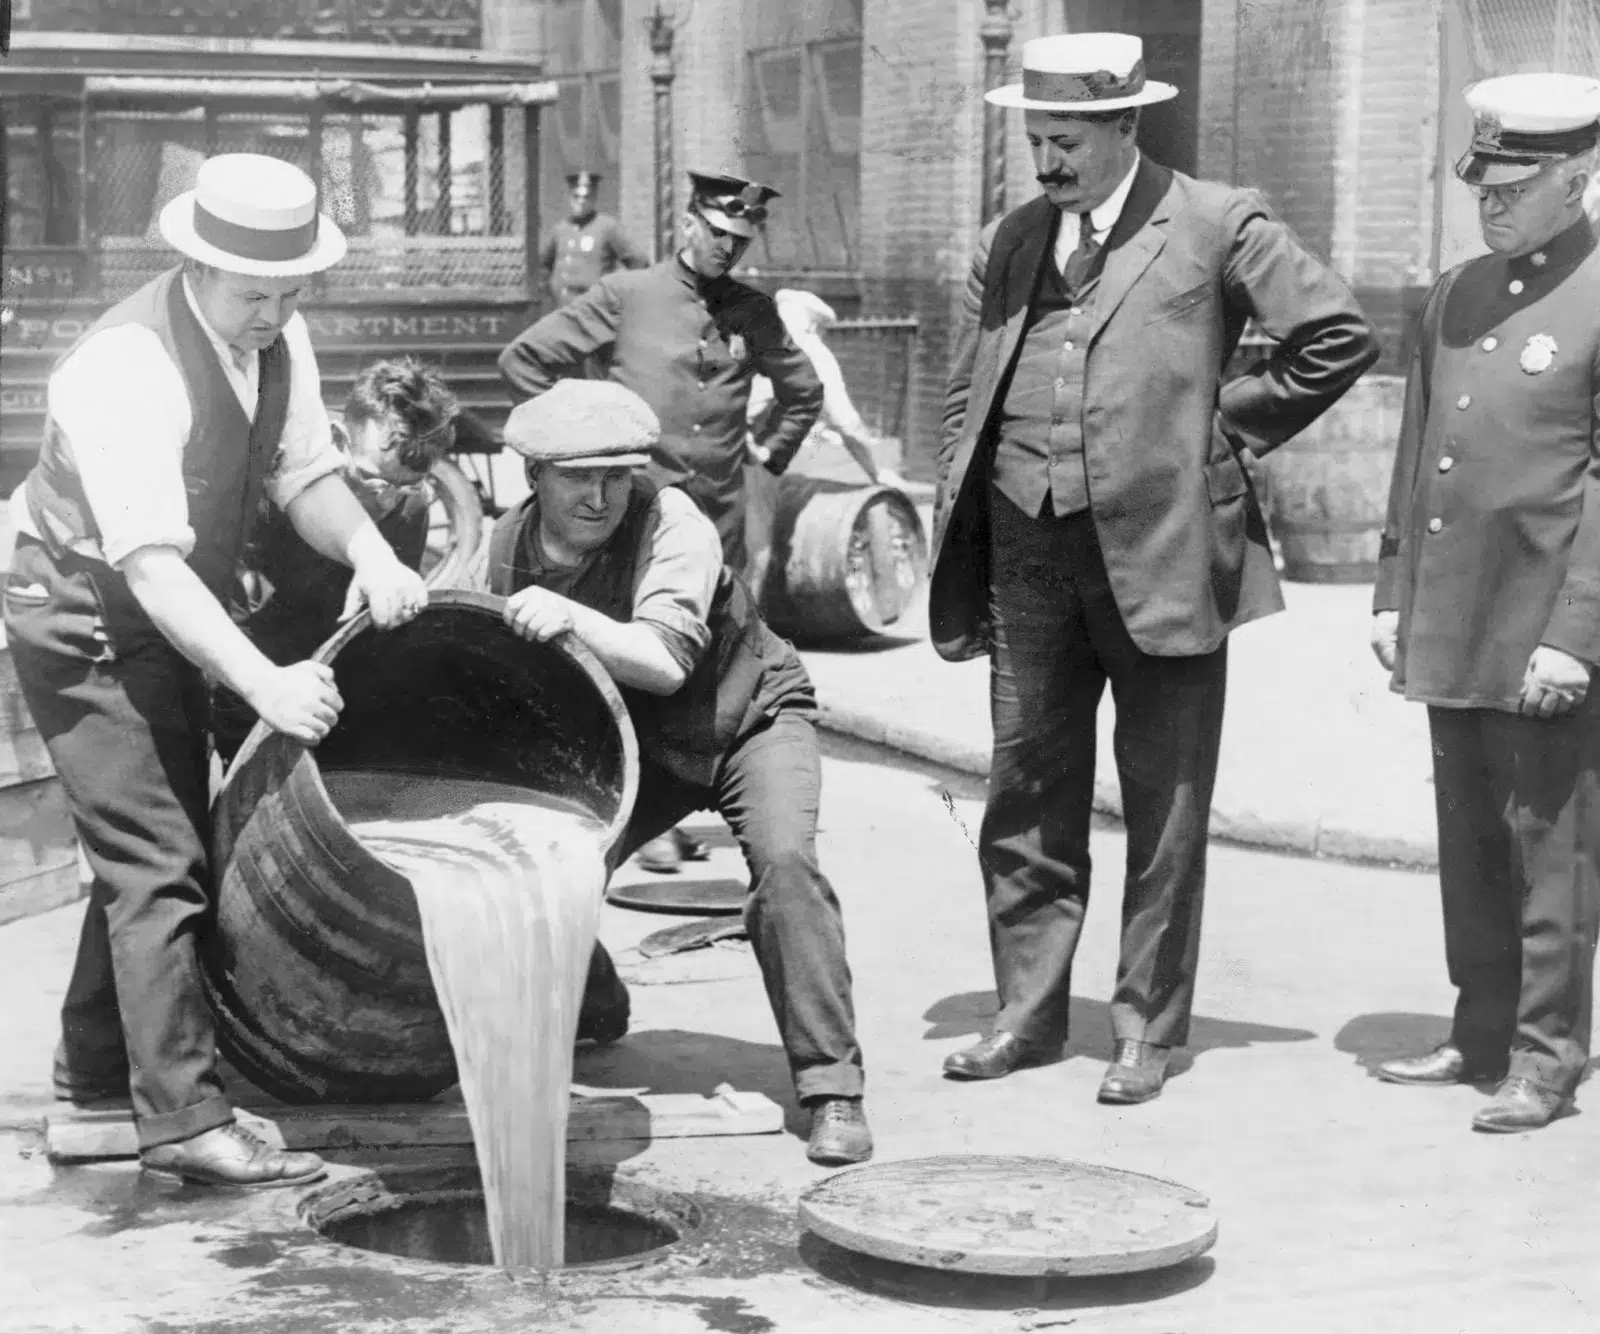 Men pouring liquid into sewer during Prohibition era.